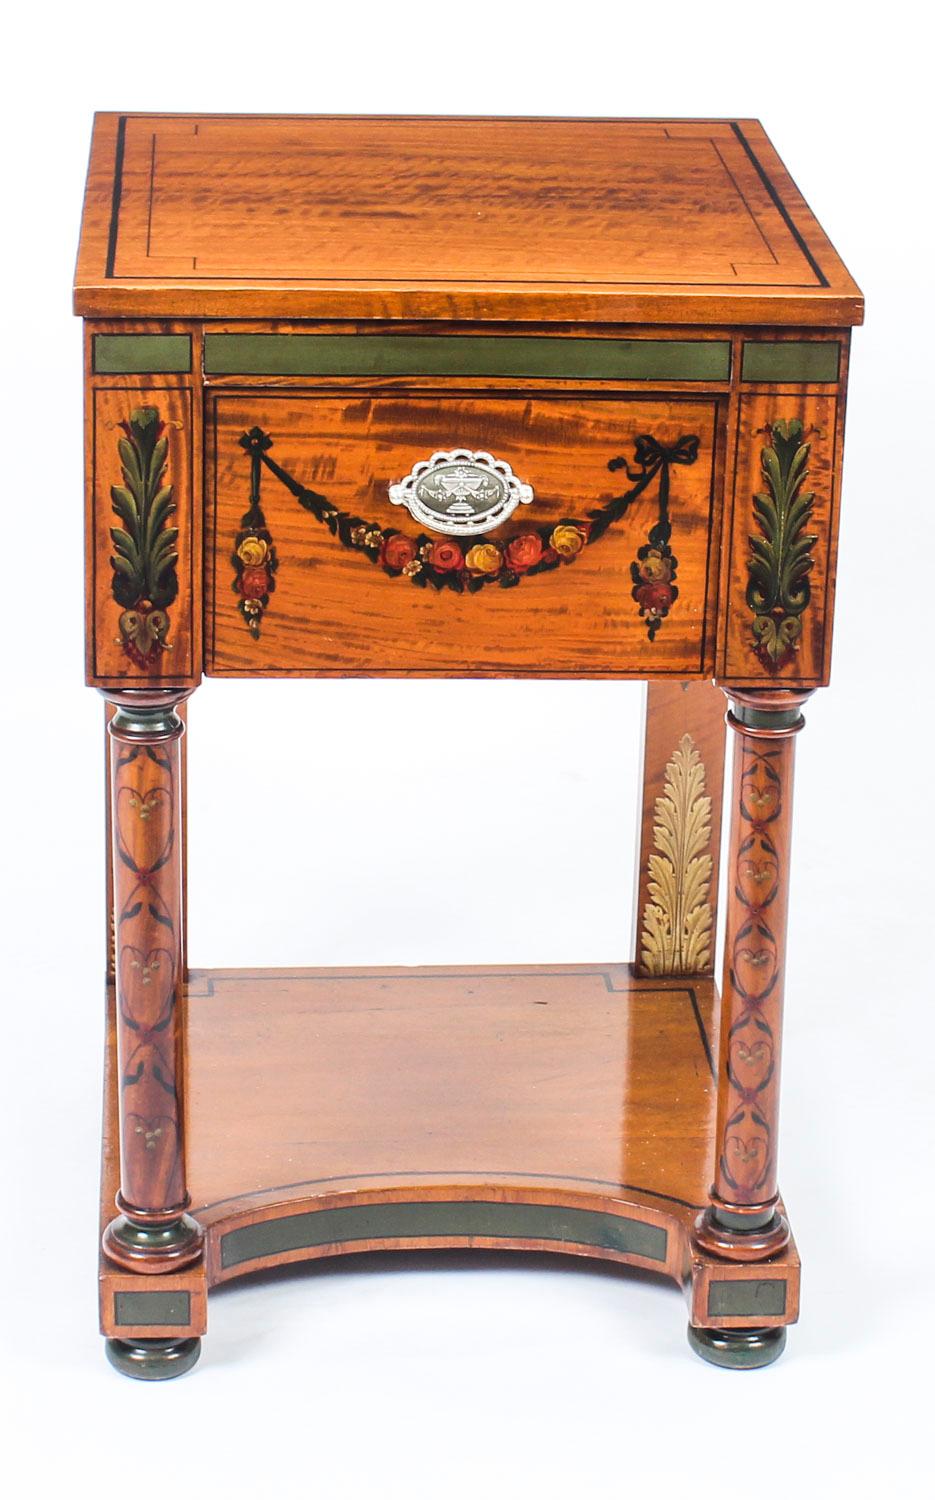 A beautiful antique Victorian freestanding satinwood pedestal cabinet, circa 1860 in date.
 
This superb piece features attractive ebonised crossbanding with exquisite hand-painted decoration consisting of draped ribbons of rock roses, anthemions